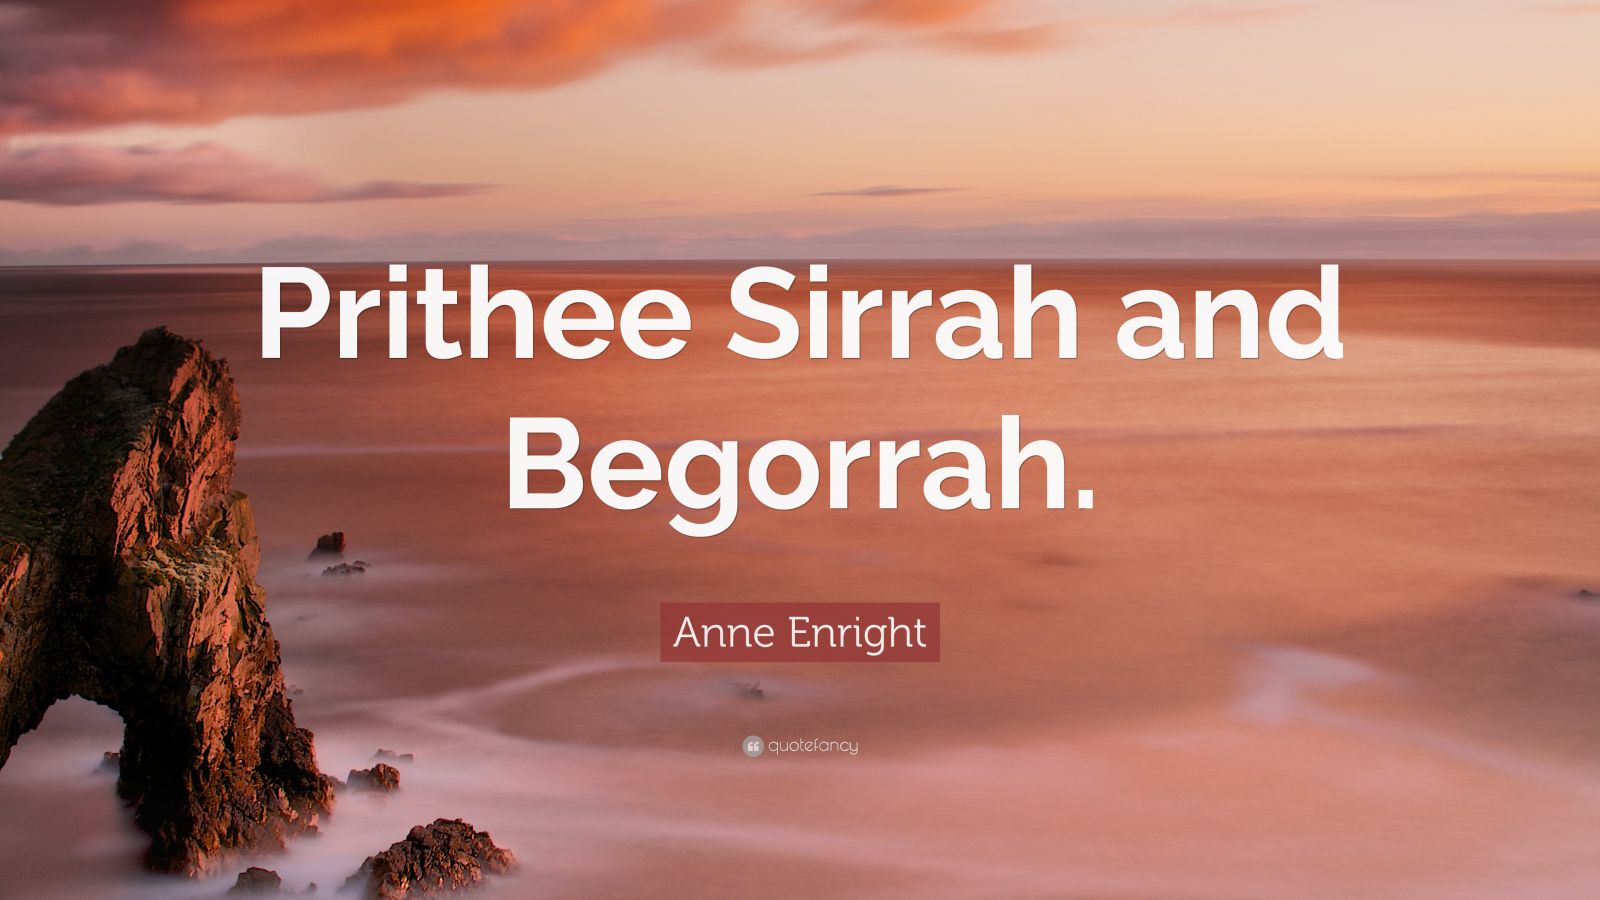 7571232 Anne Enright Quote Prithee Sirrah And Begorrah 